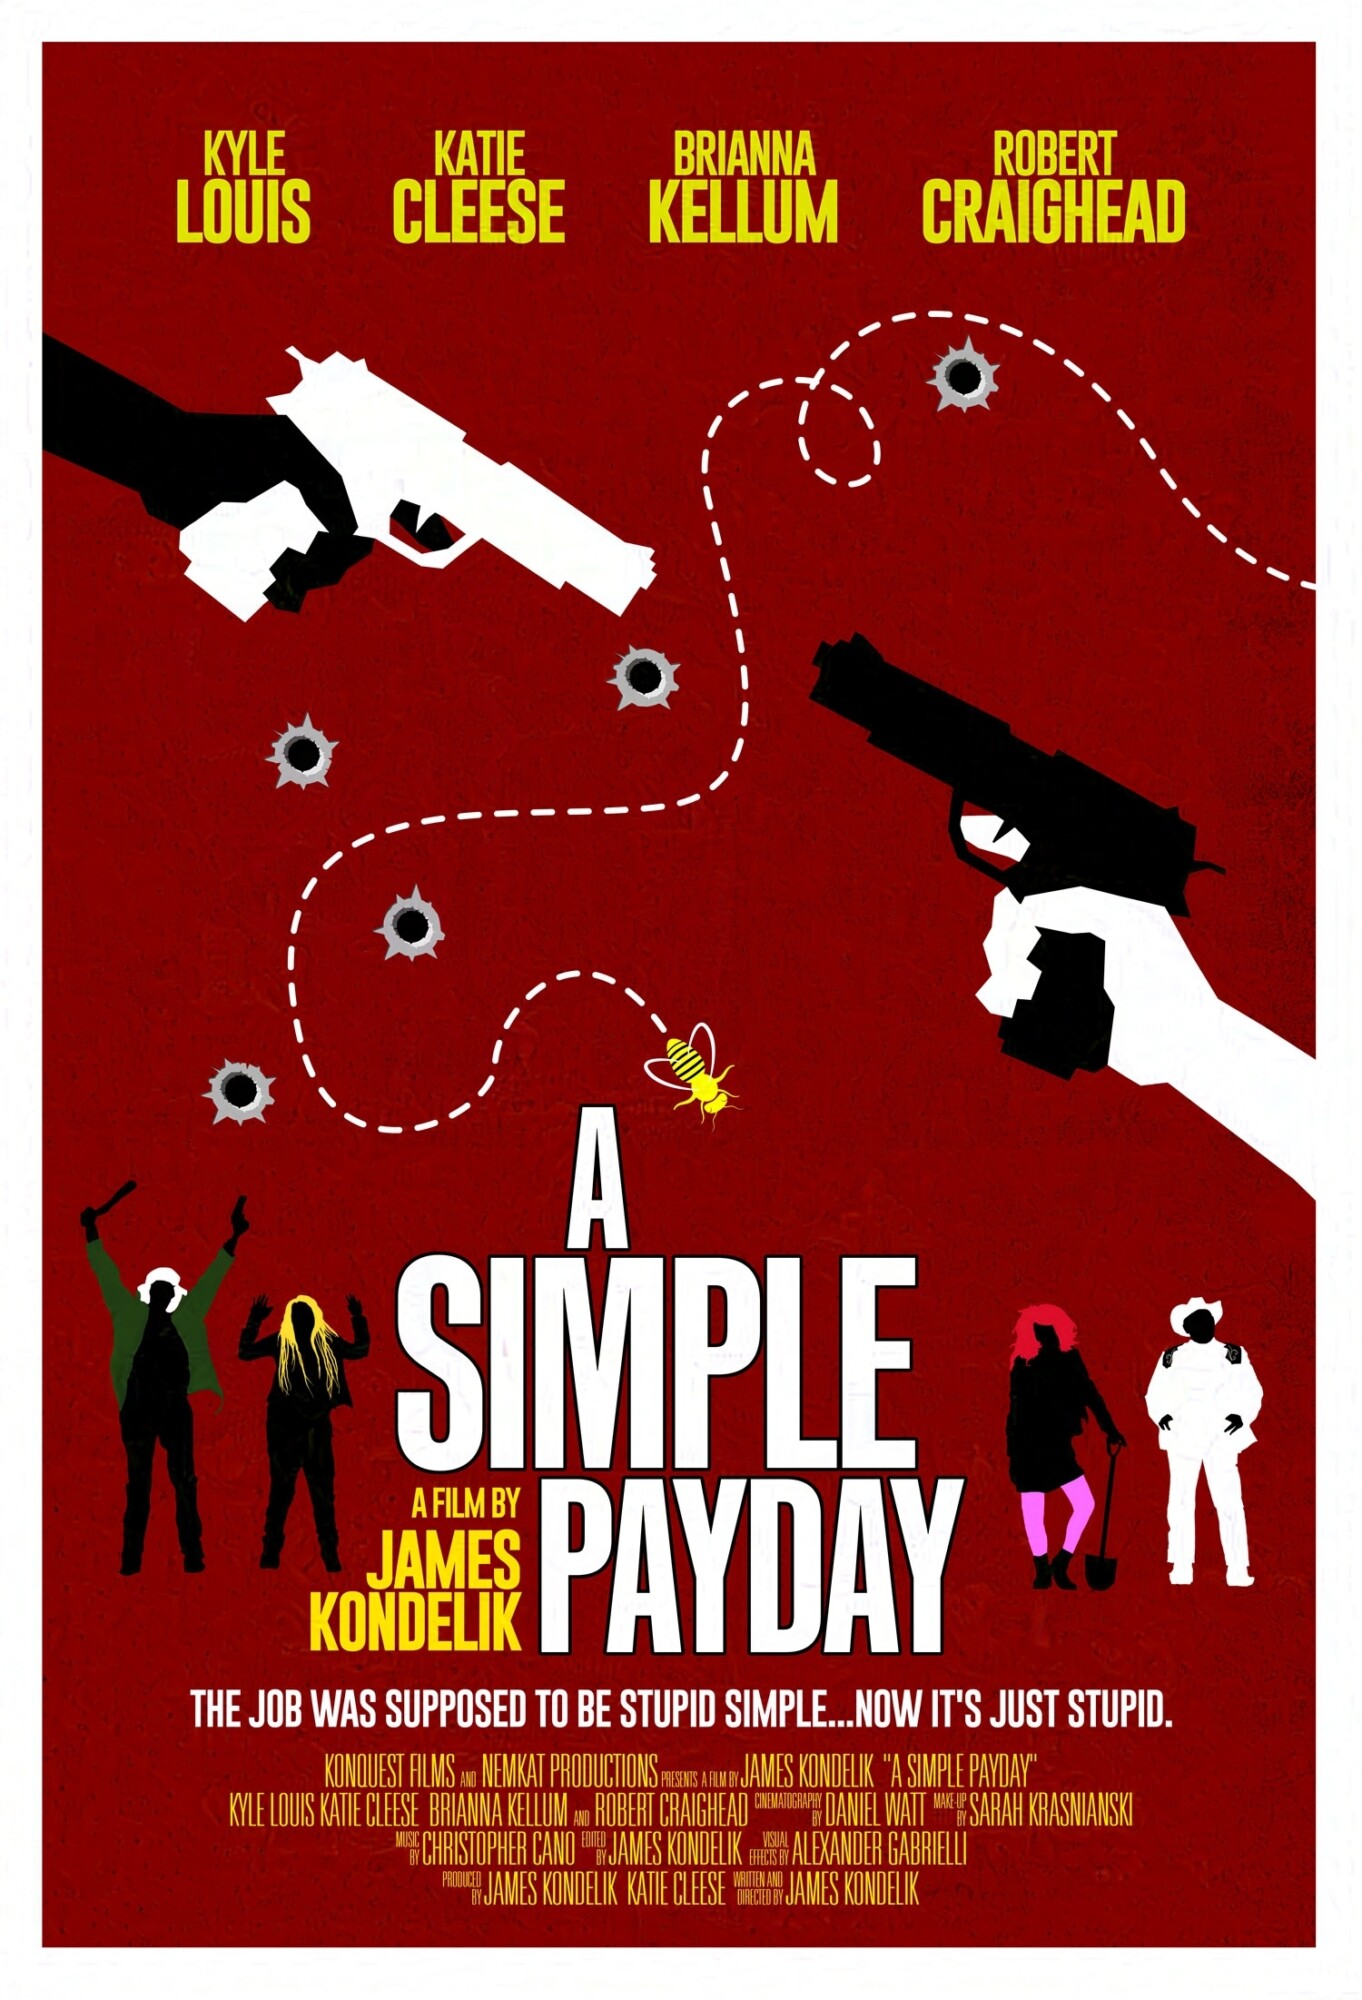 A Simple Payday